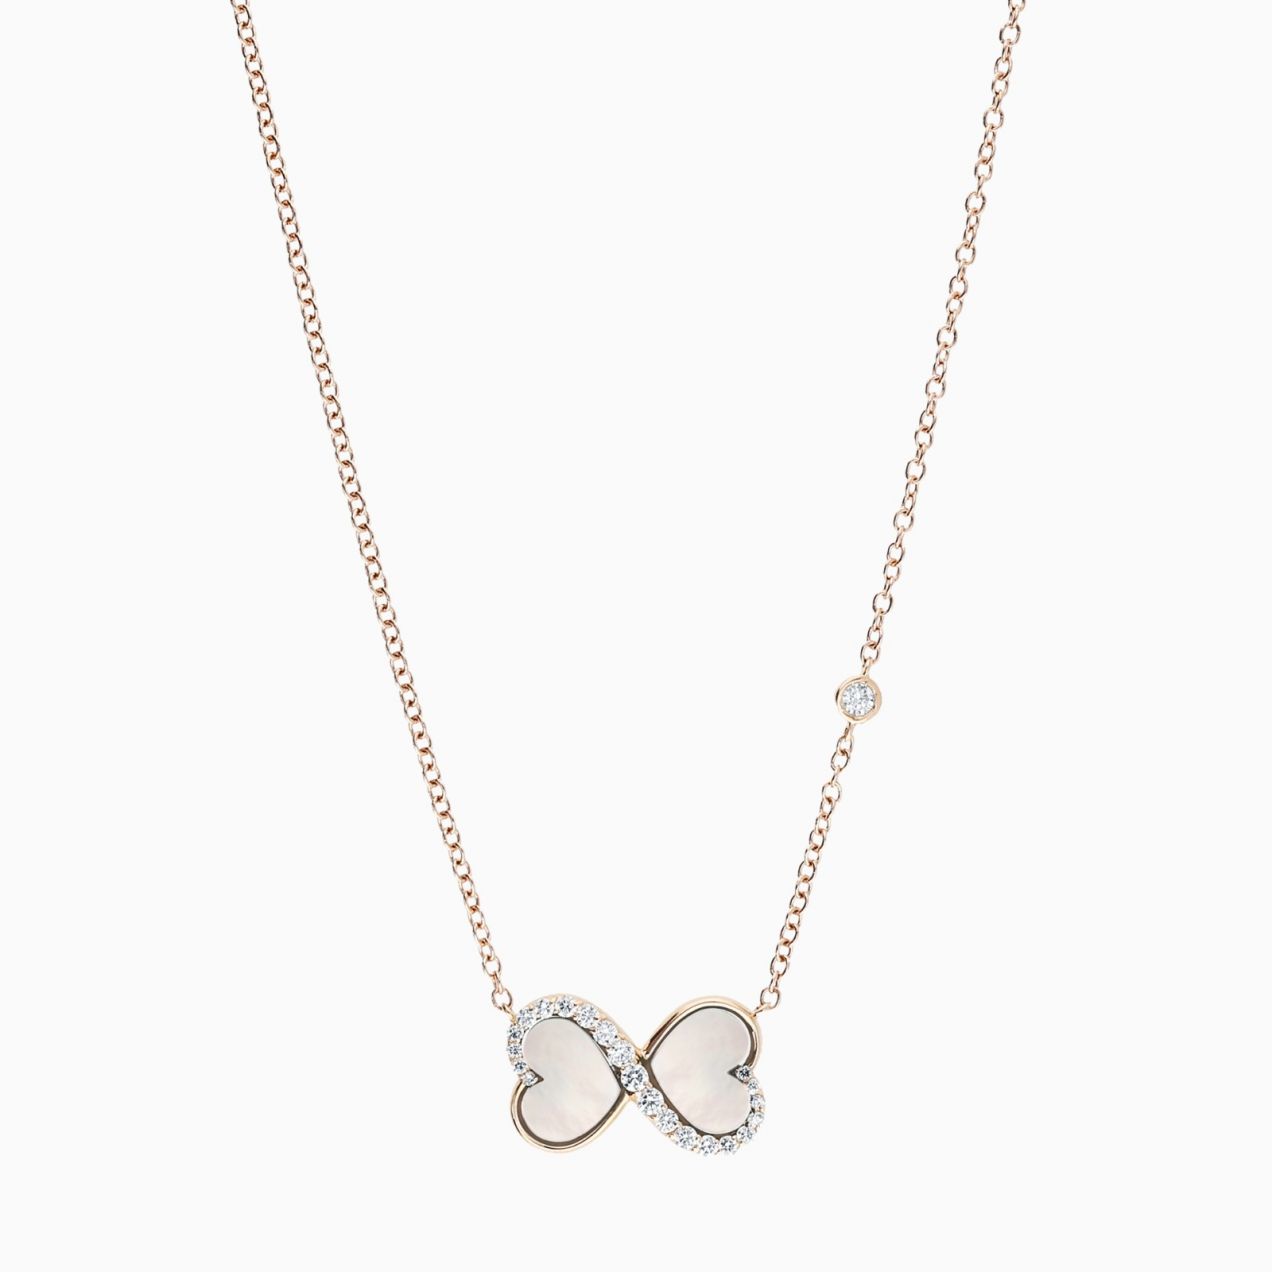 Infinity symbol pendant in rose gold with heart-cut mother of pearl and diamonds